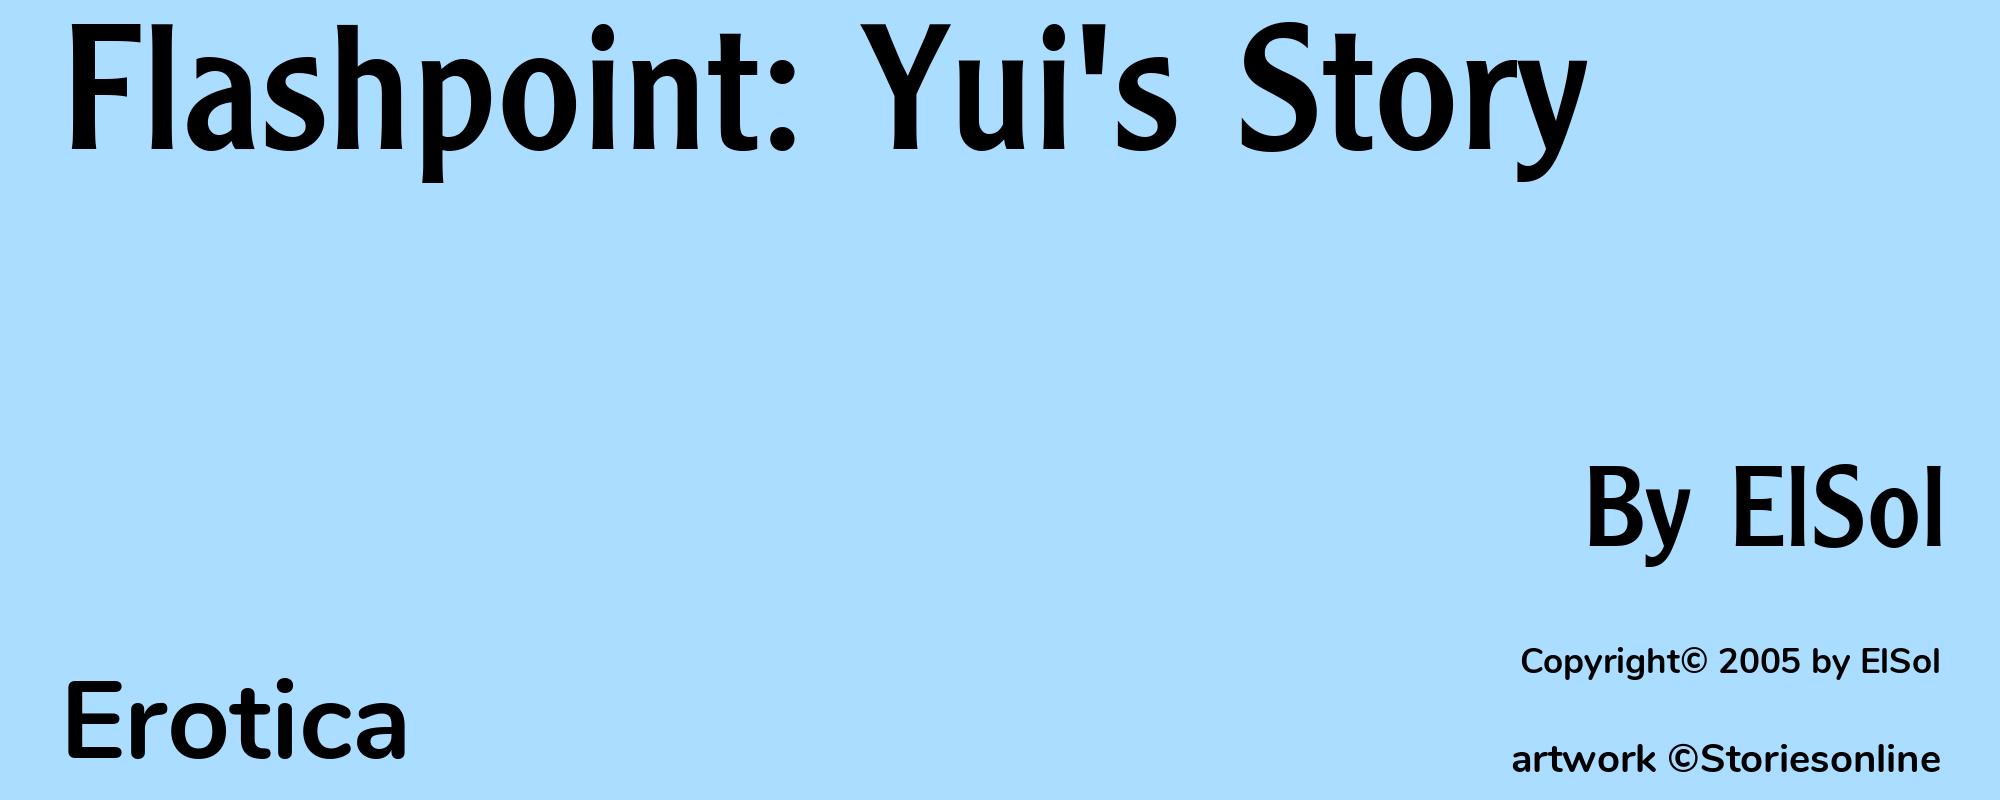 Flashpoint: Yui's Story - Cover